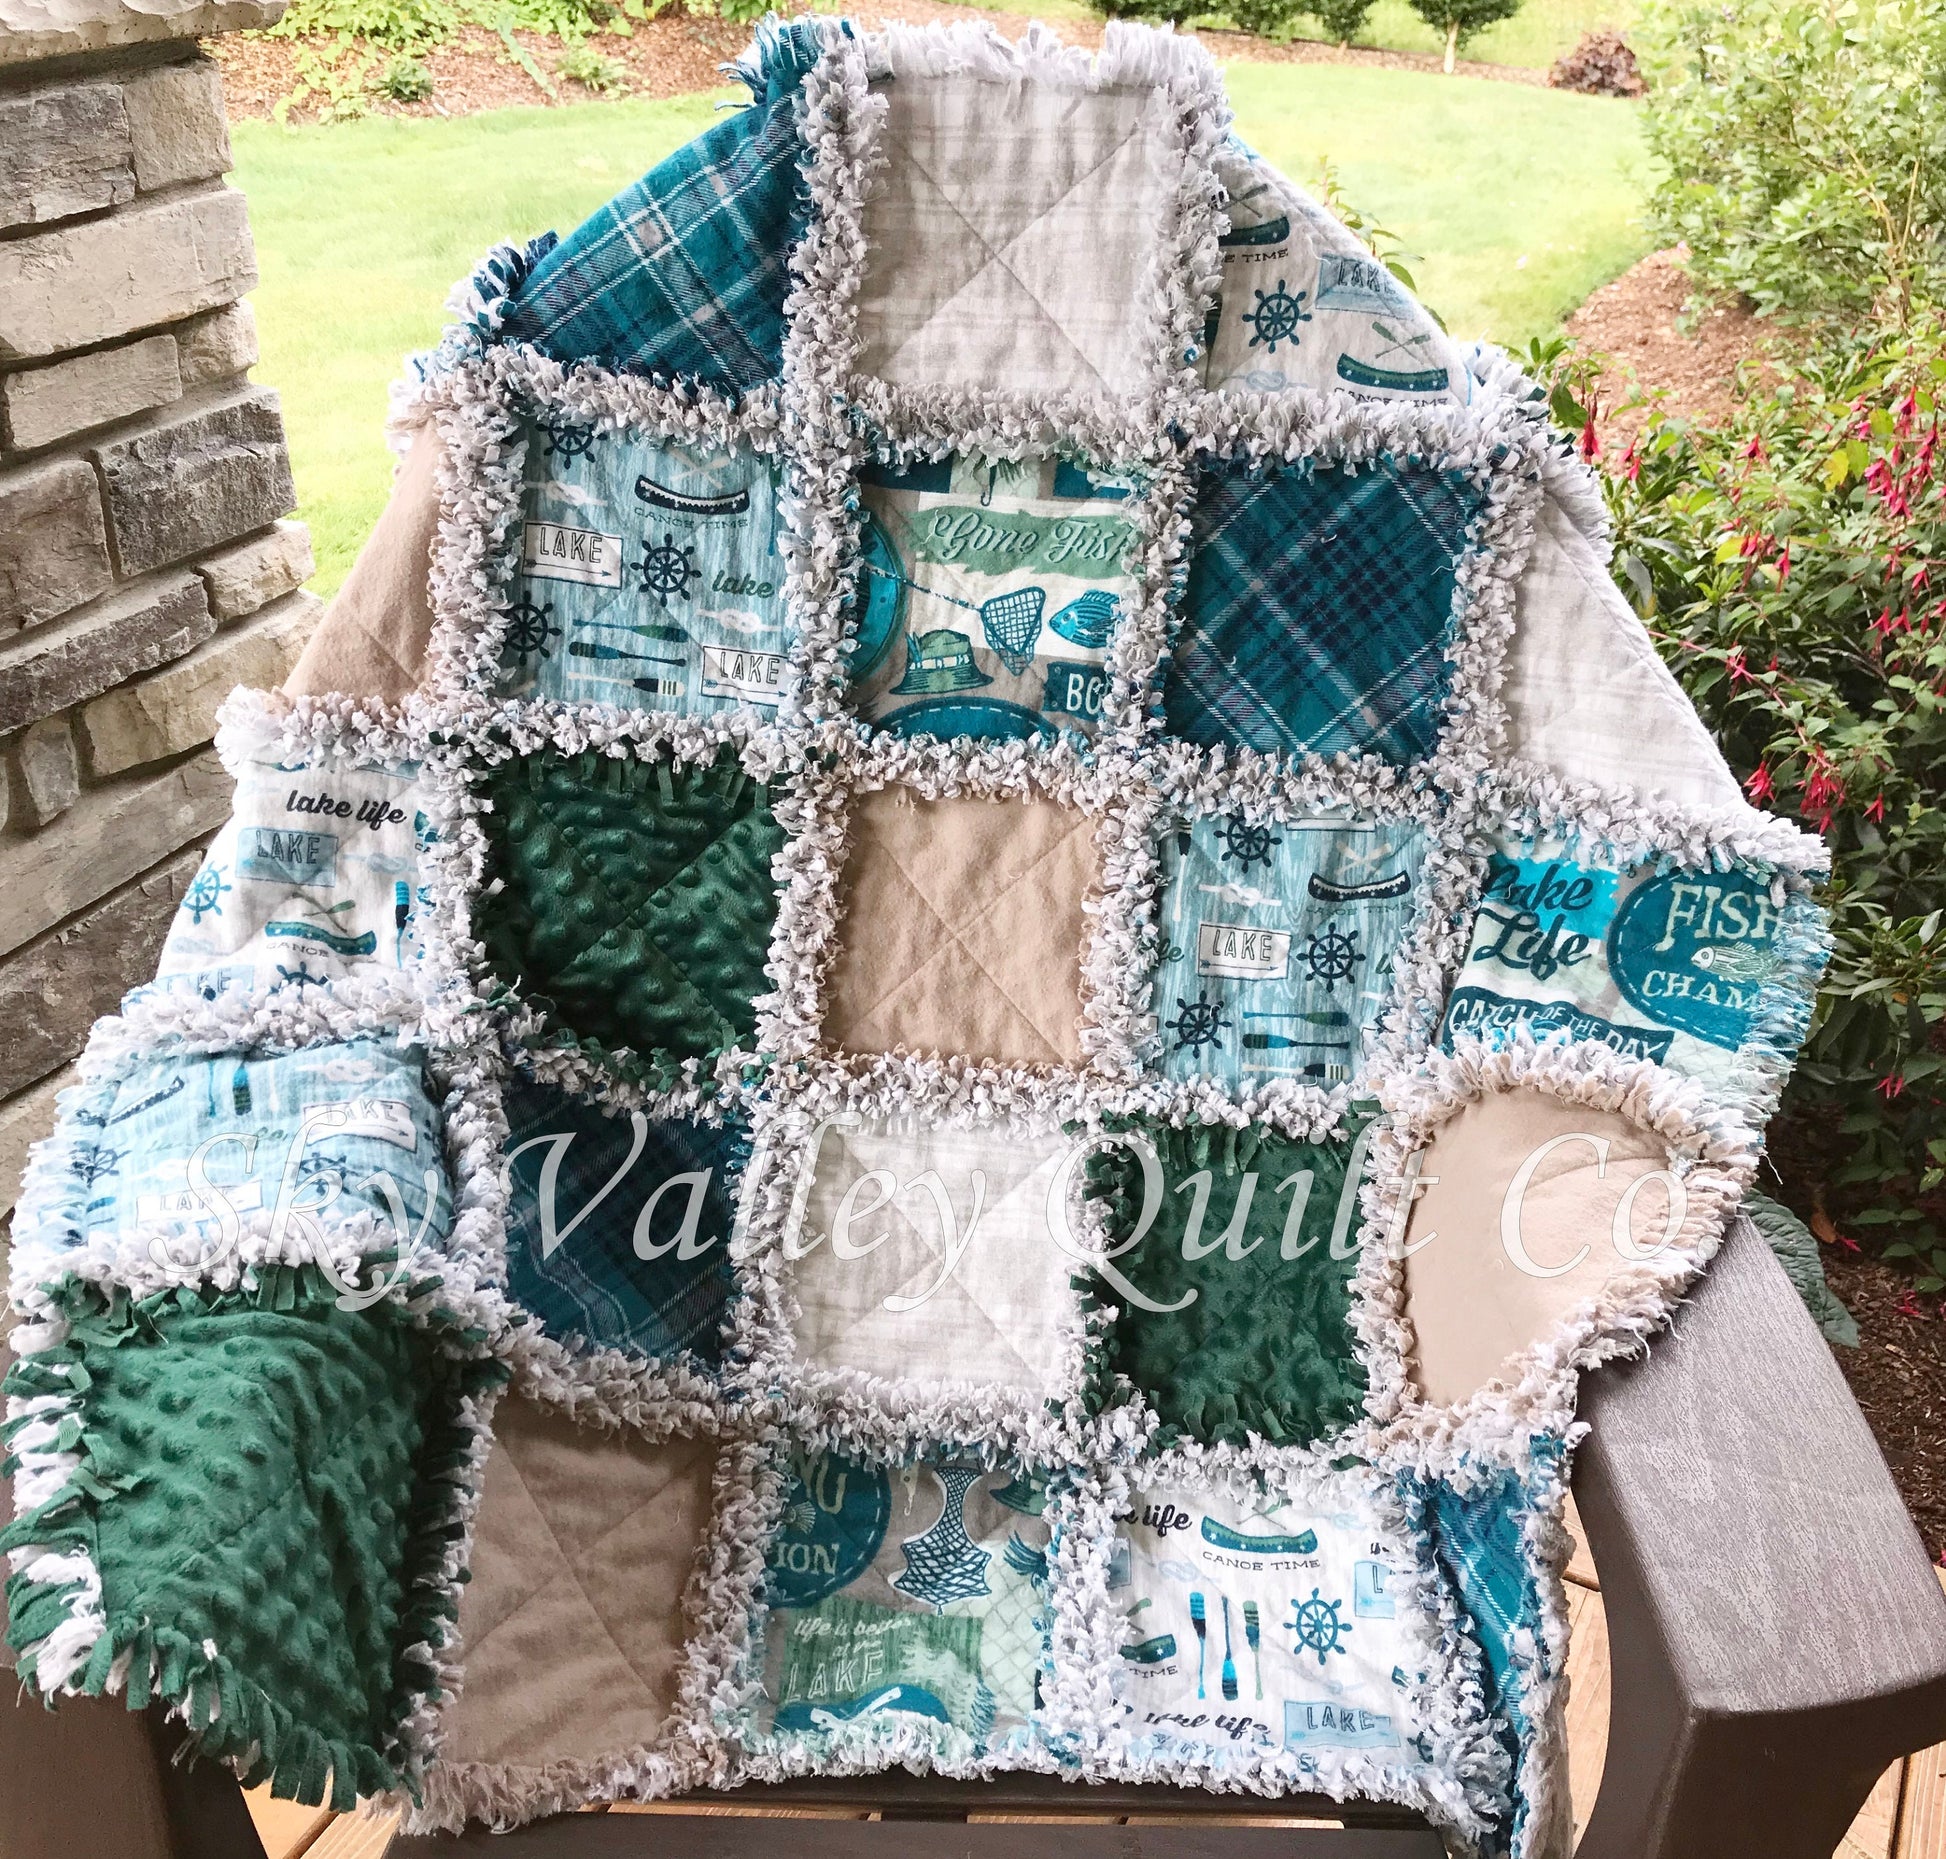 Finished rag quilt - Lake Fishing in Teal, gray and green